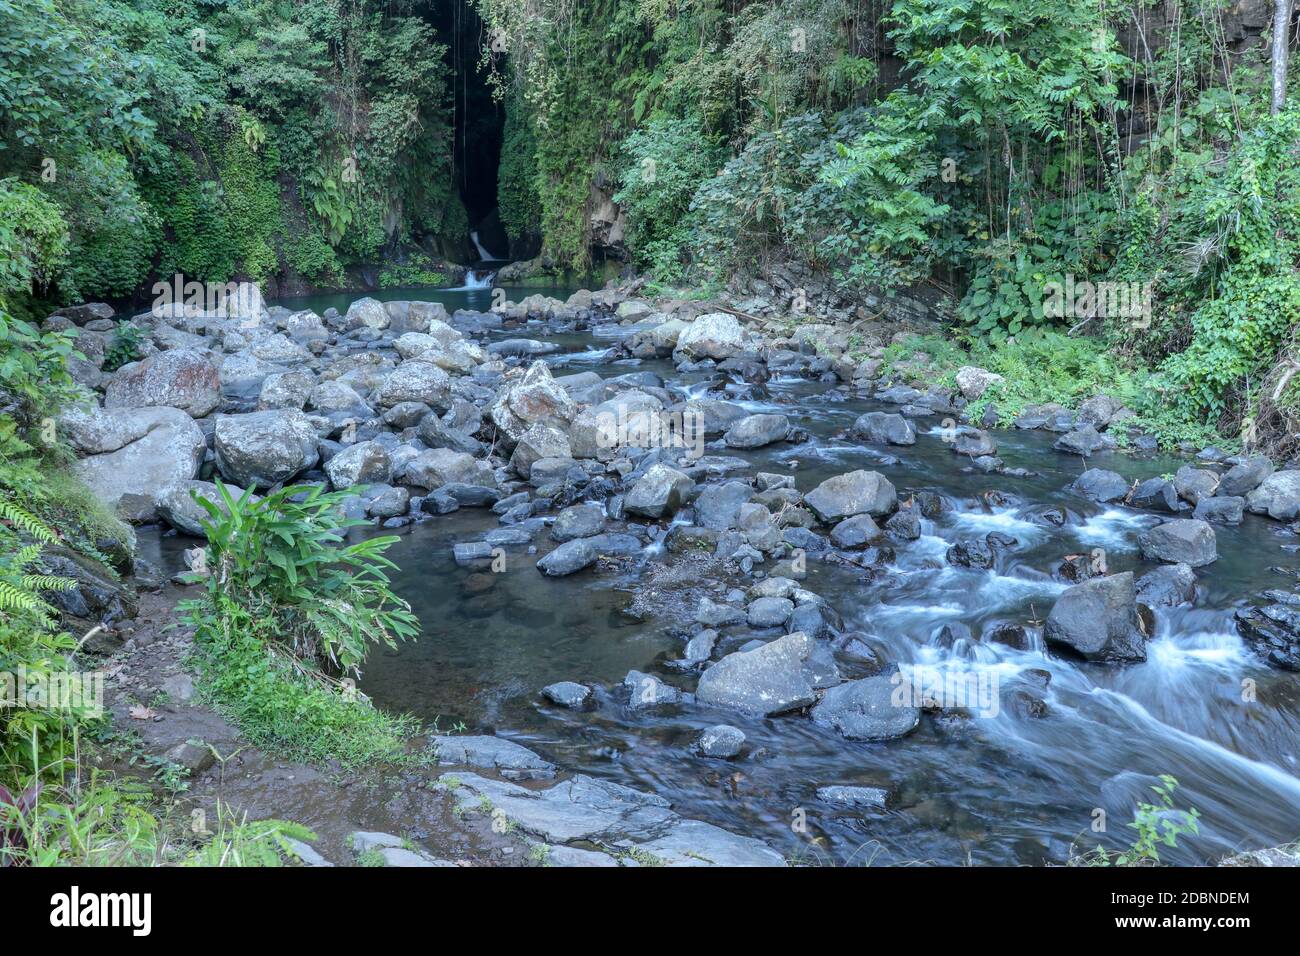 Mountain river bed with many boulders rising above the surface. Wild tropical jungle lining a river bed. Natural place. Stock Photo